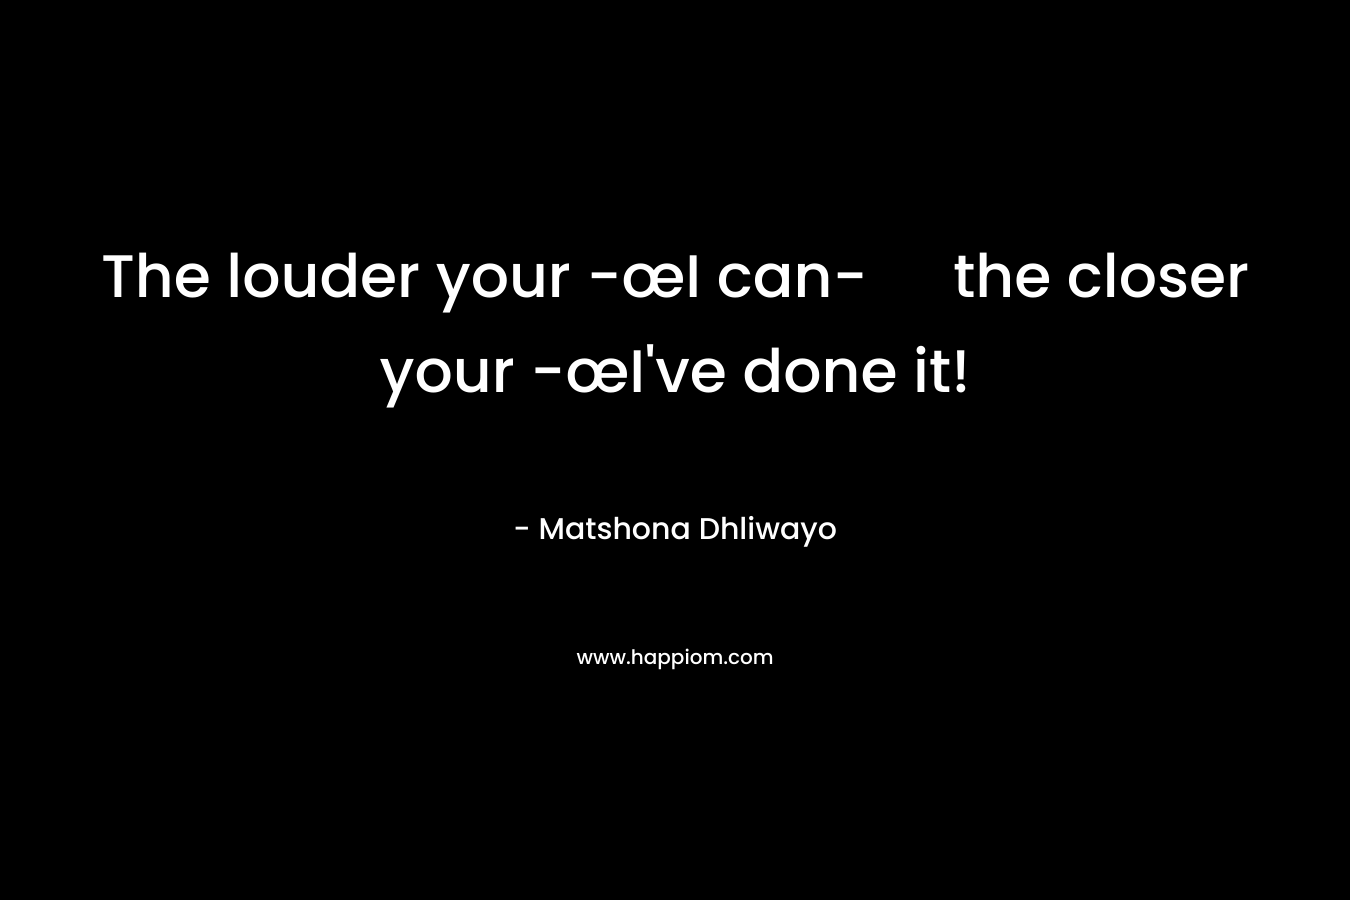 The louder your -œI can- the closer your -œI've done it!